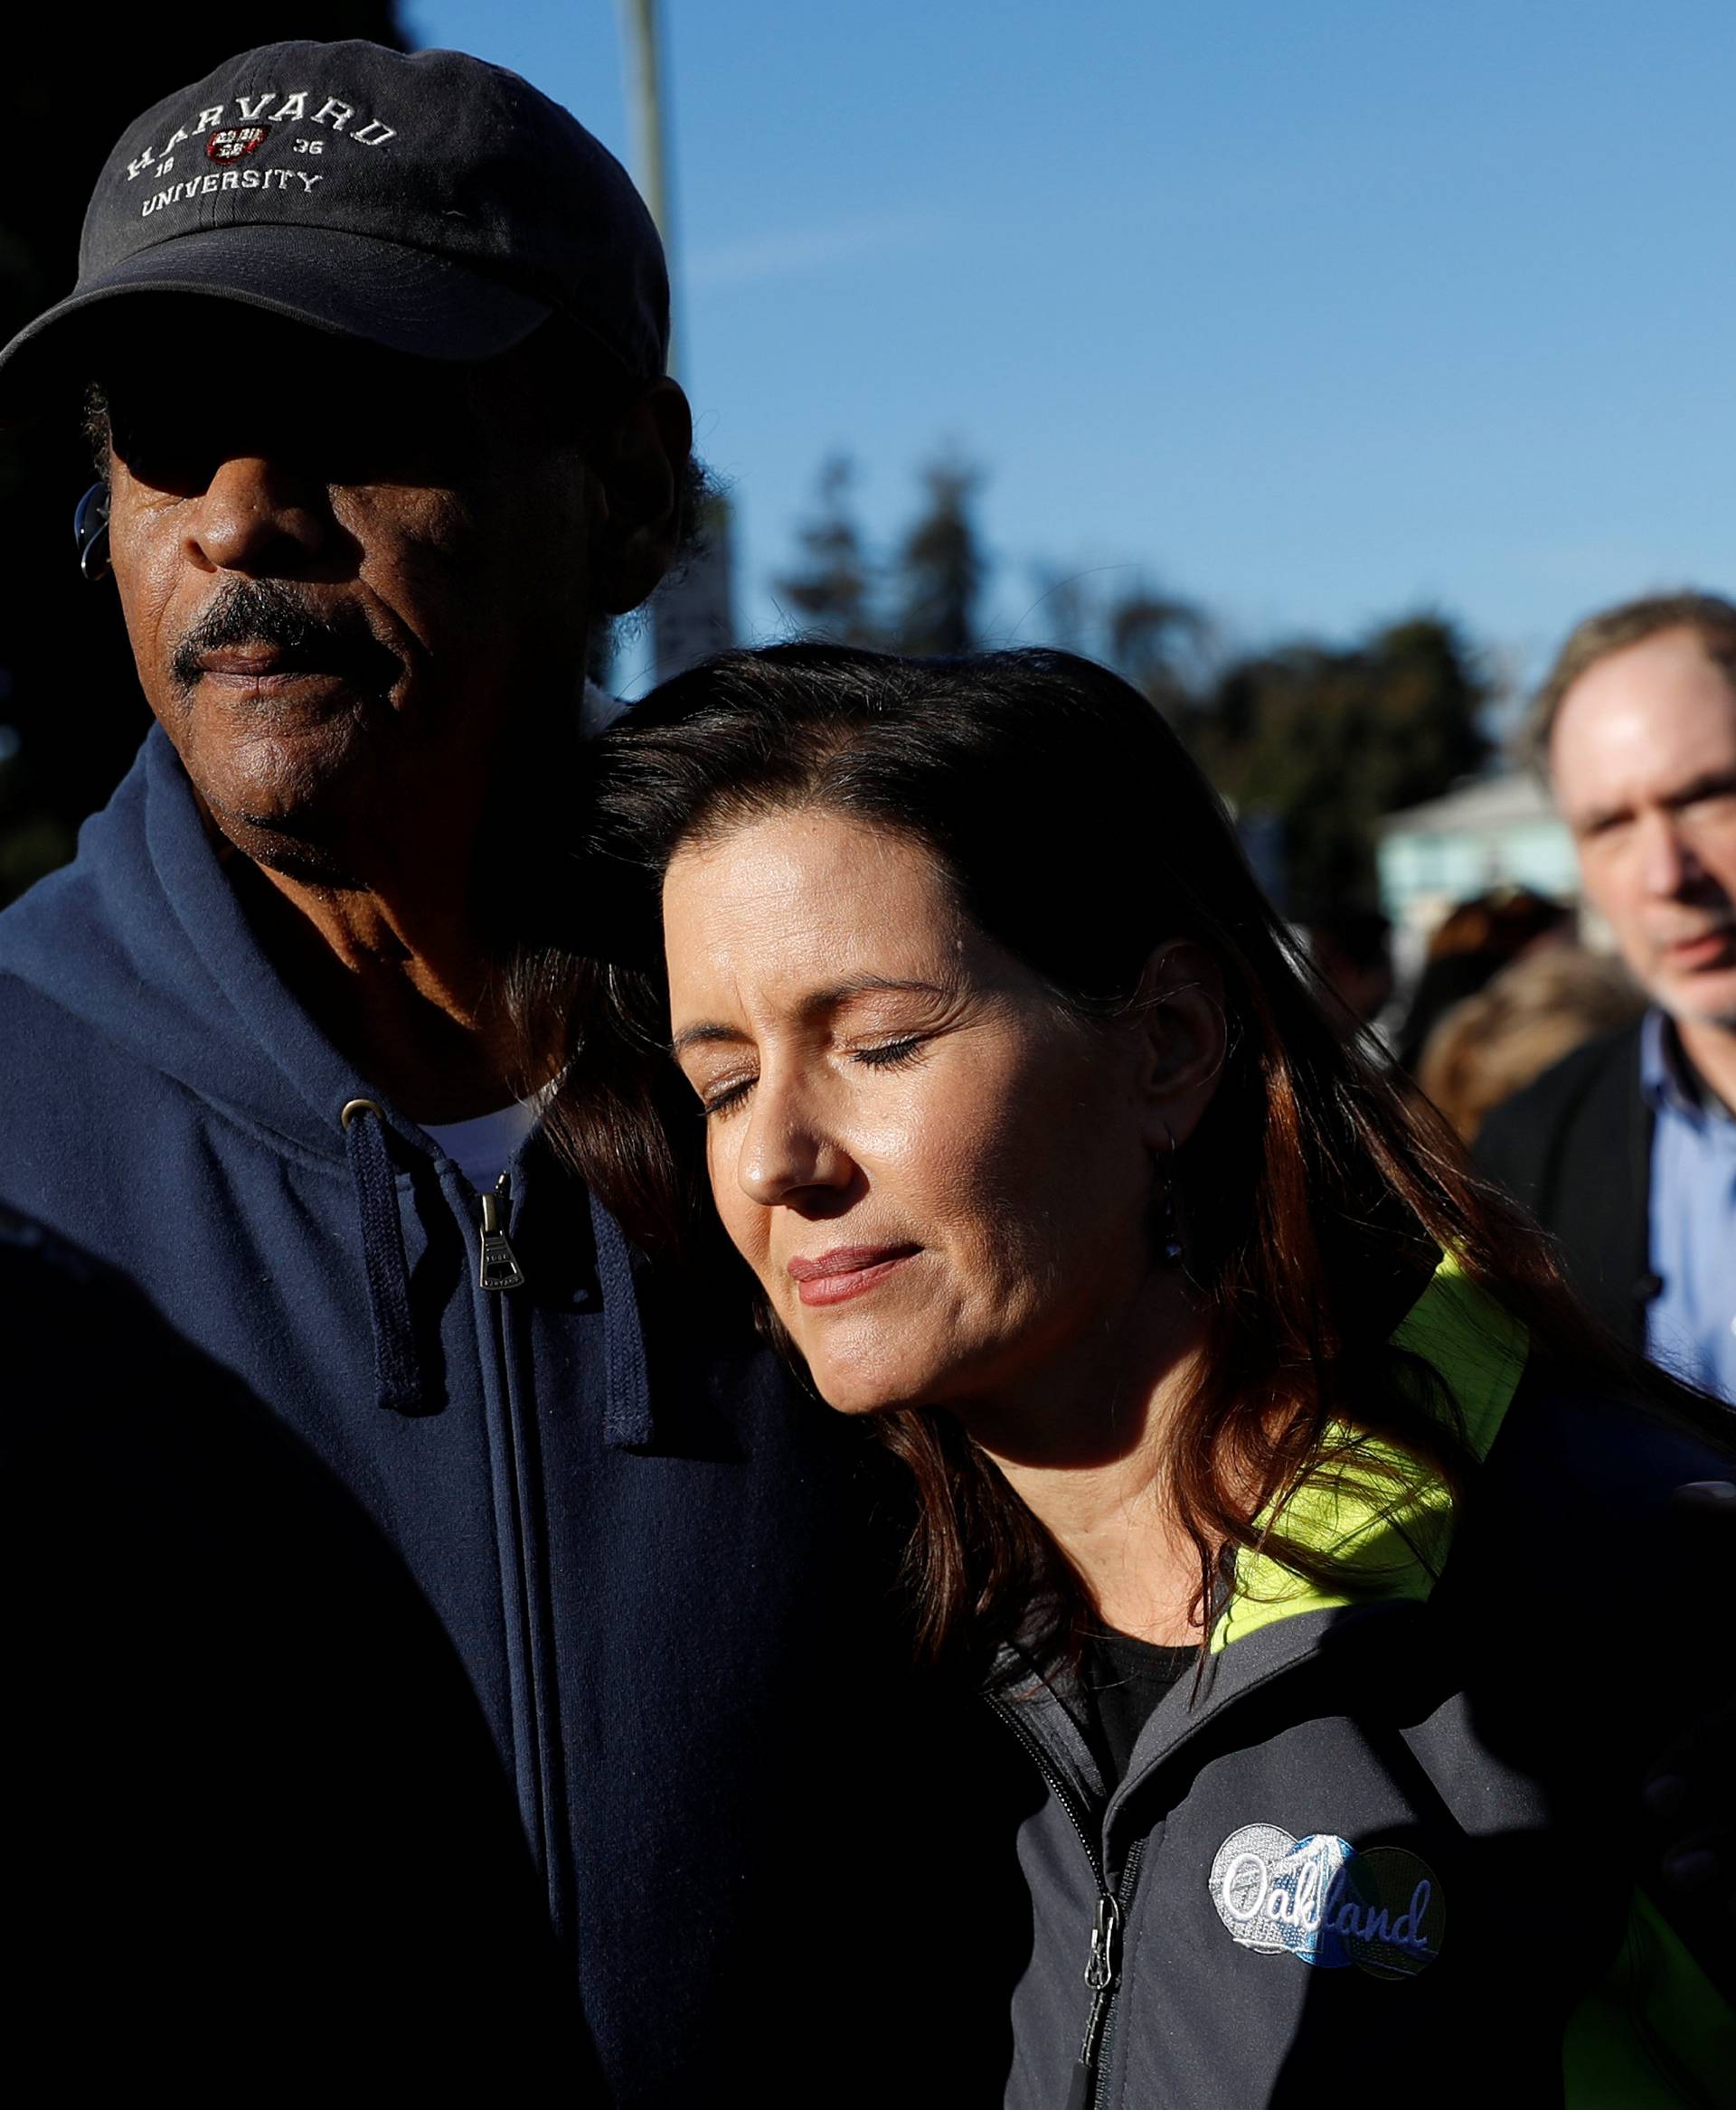 Oakland City Council Member Larry Reid (L) embraces Mayor Libby Schaaf after a new conference at the scene of a fire in the Fruitvale district of Oakland